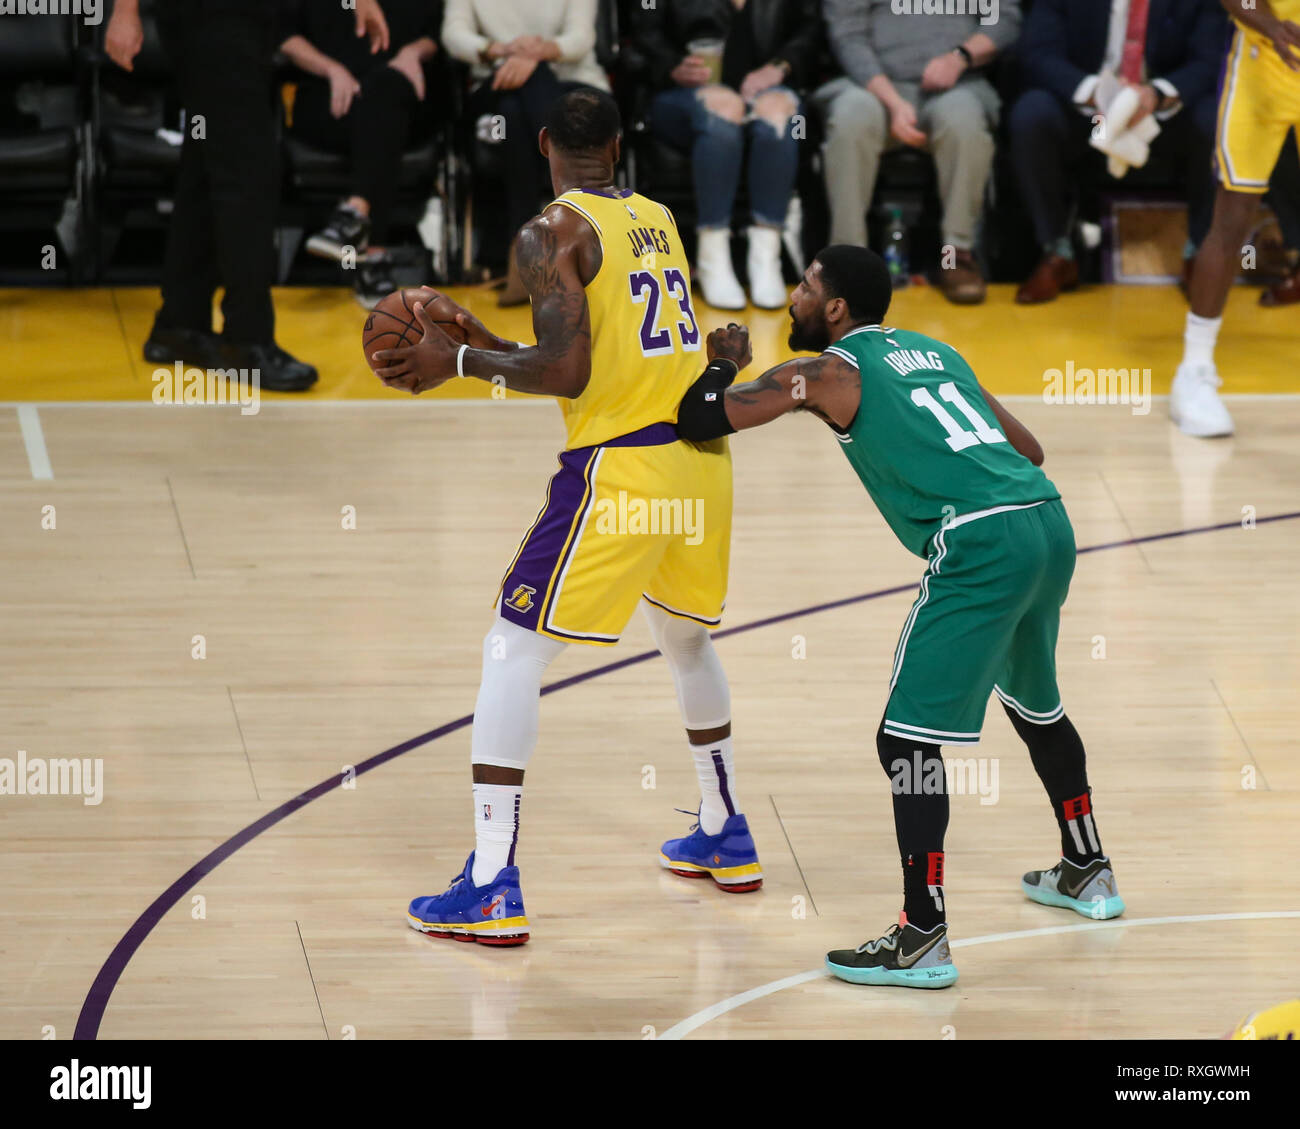 Los Angeles Lakers forward LeBron James #23 being guarded by Boston Celtics guard Kyrie Irving #11 during the Boston Celtics vs Los Angeles Lakers game at Staples Center in Los Angeles, CA on March 09, 2019. (Photo by Jevone Moore) Stock Photo